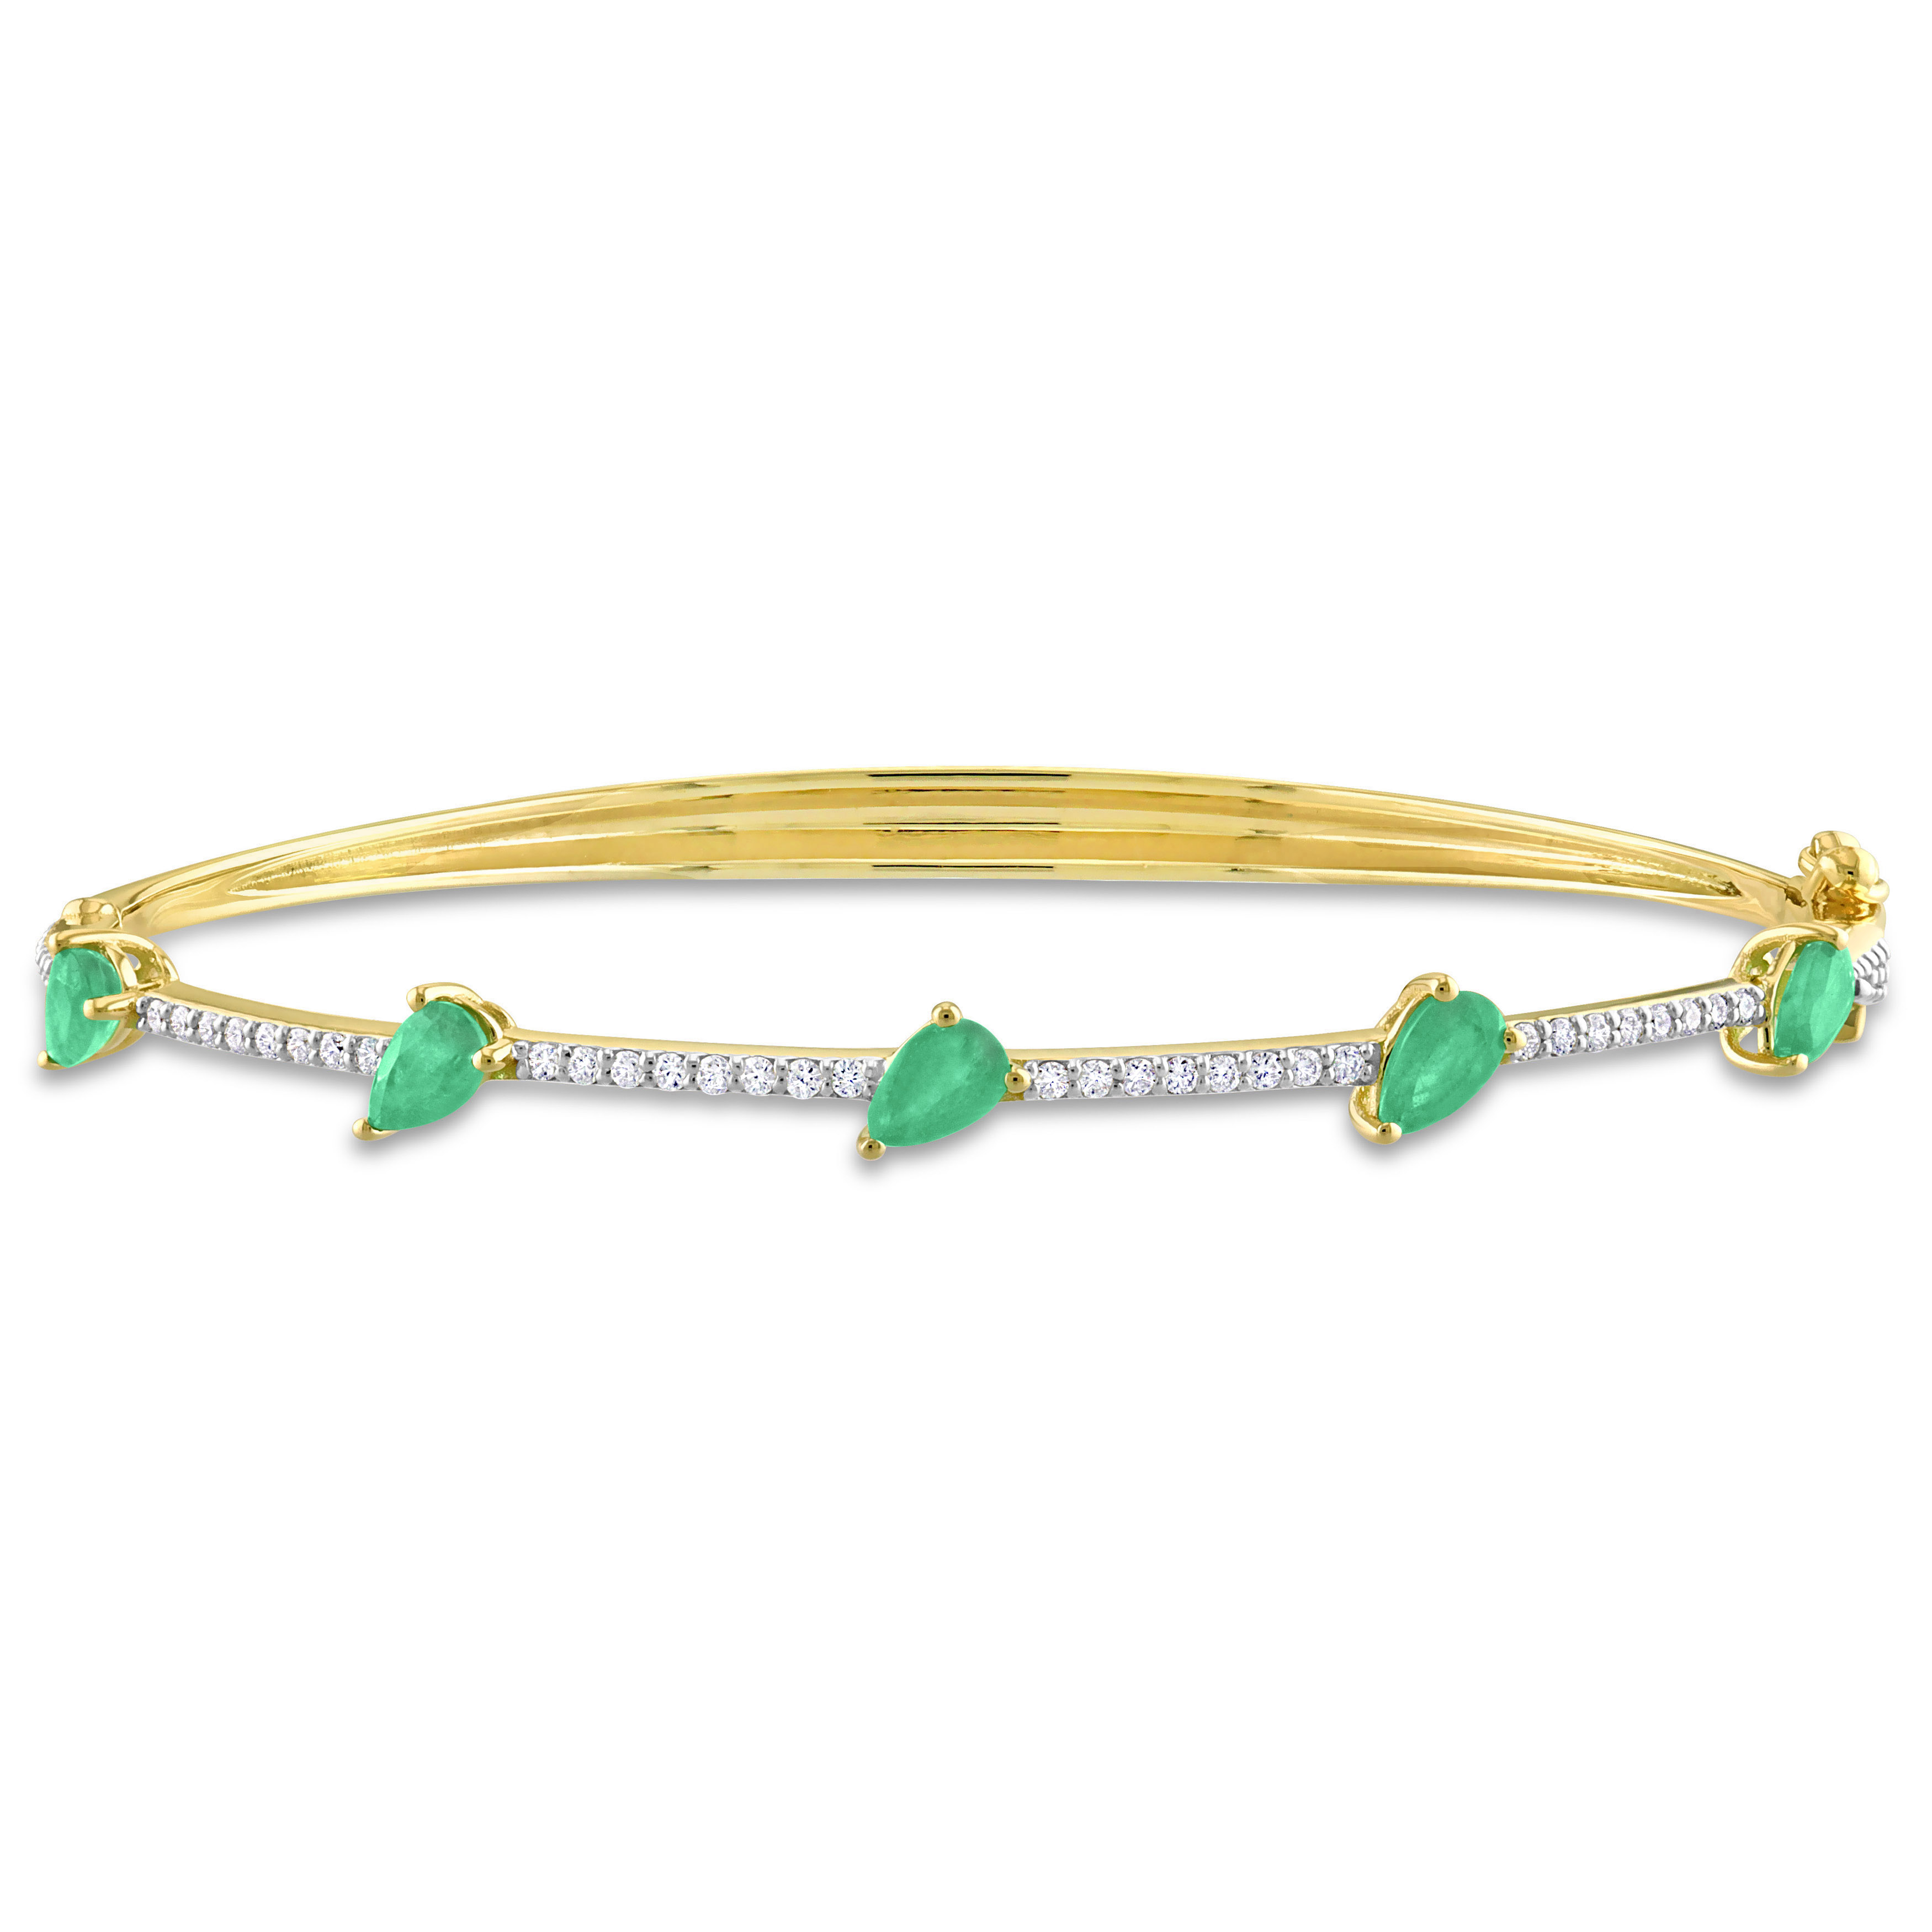 7/8 CT TGW Pear-Shaped Emerald and 1/4 CT TDW Diamond Station Bracelet in 14k Yellow Gold - 7 in.